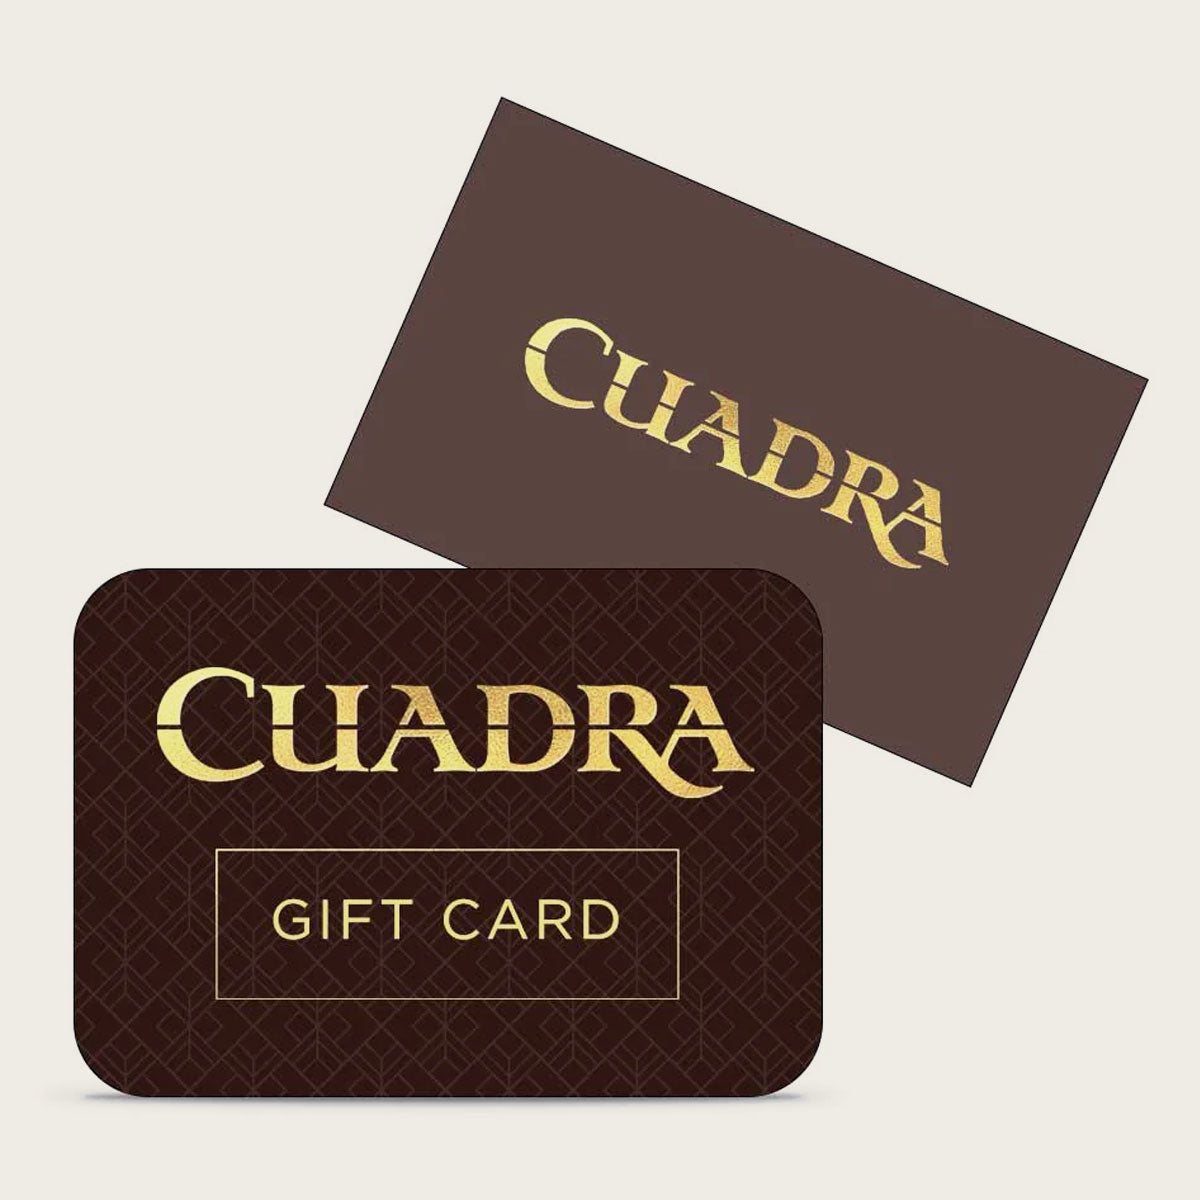 Surprise your loved ones with the perfect gift of choice by presenting them with a Cuadra Gift Card.